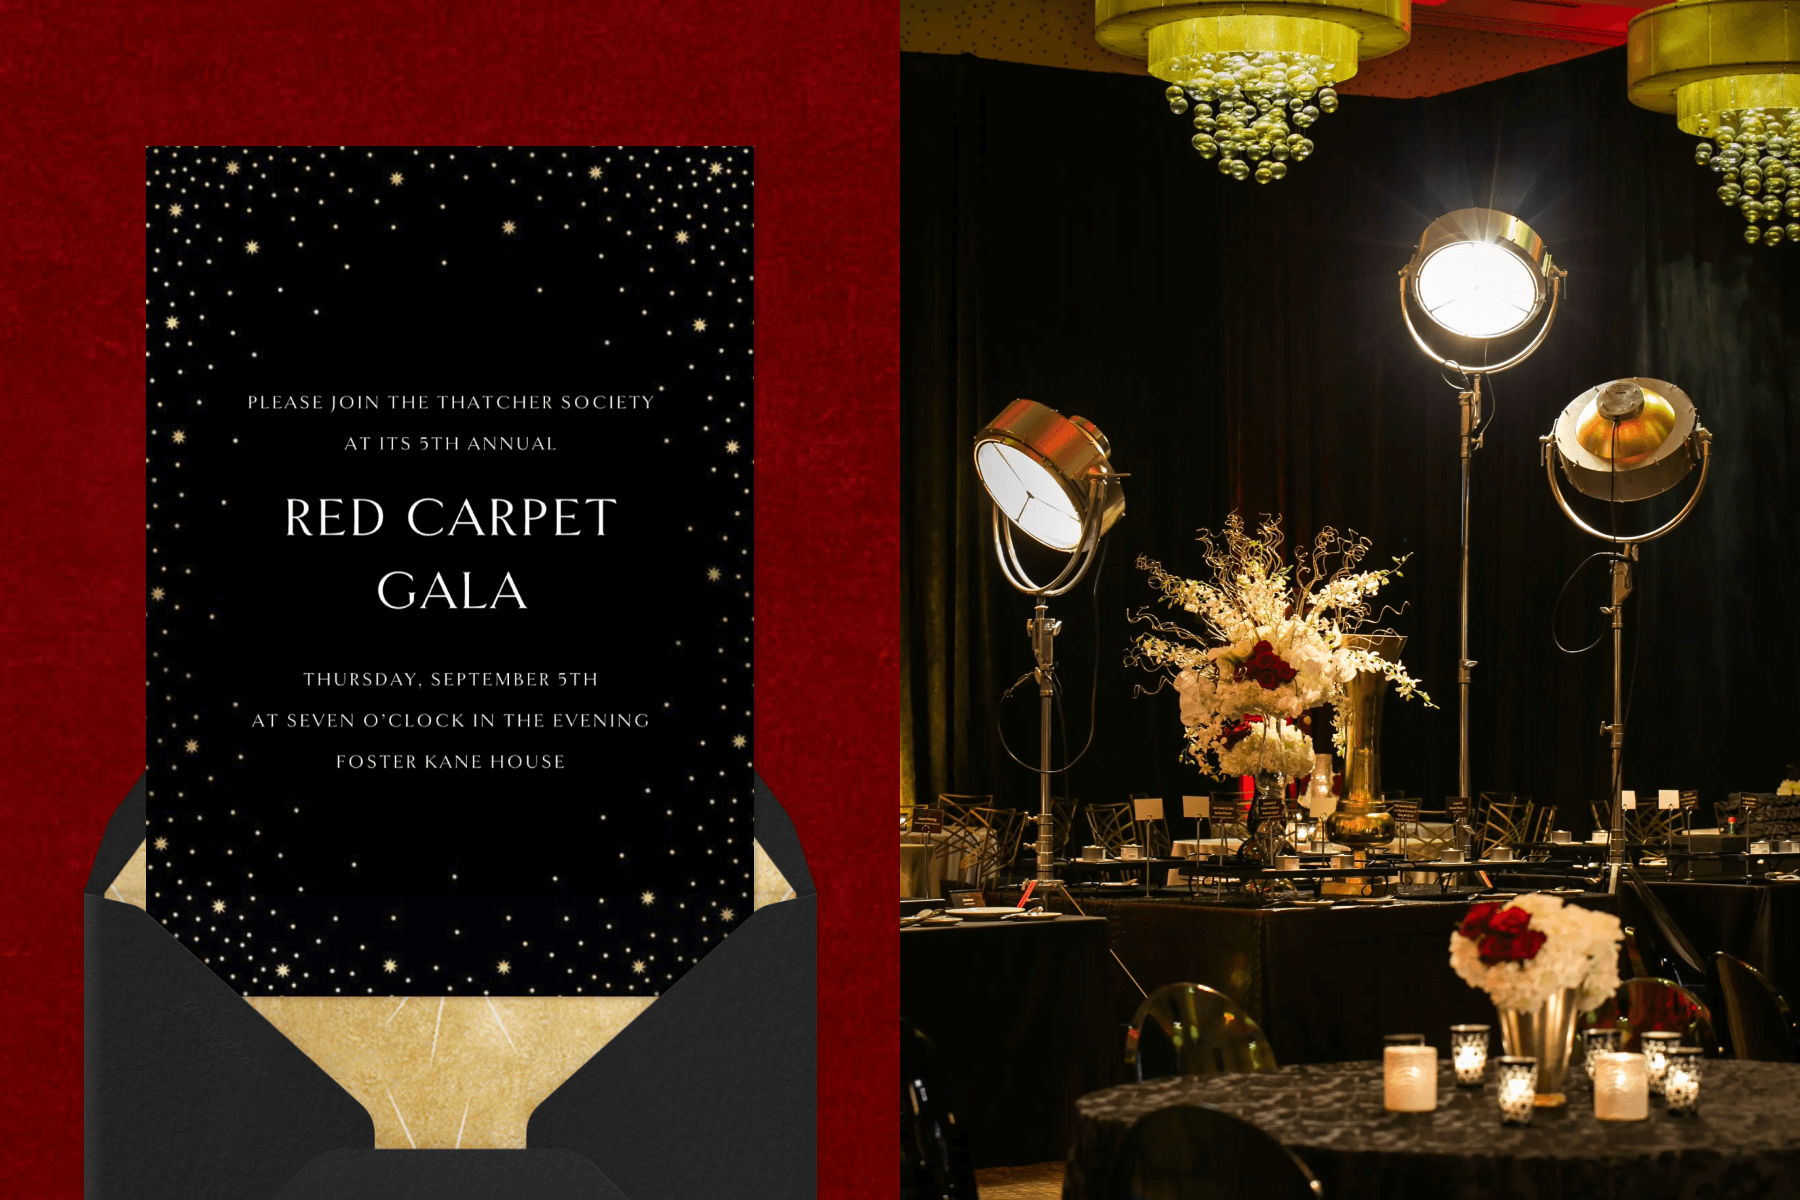 Left: A black red carpet gala invitation with clusters of small gold stars forming a border. Right: A darkened room with black walls and modern chandeliers and three gold spotlights, black round tables, candles and white and red flower arrangements.